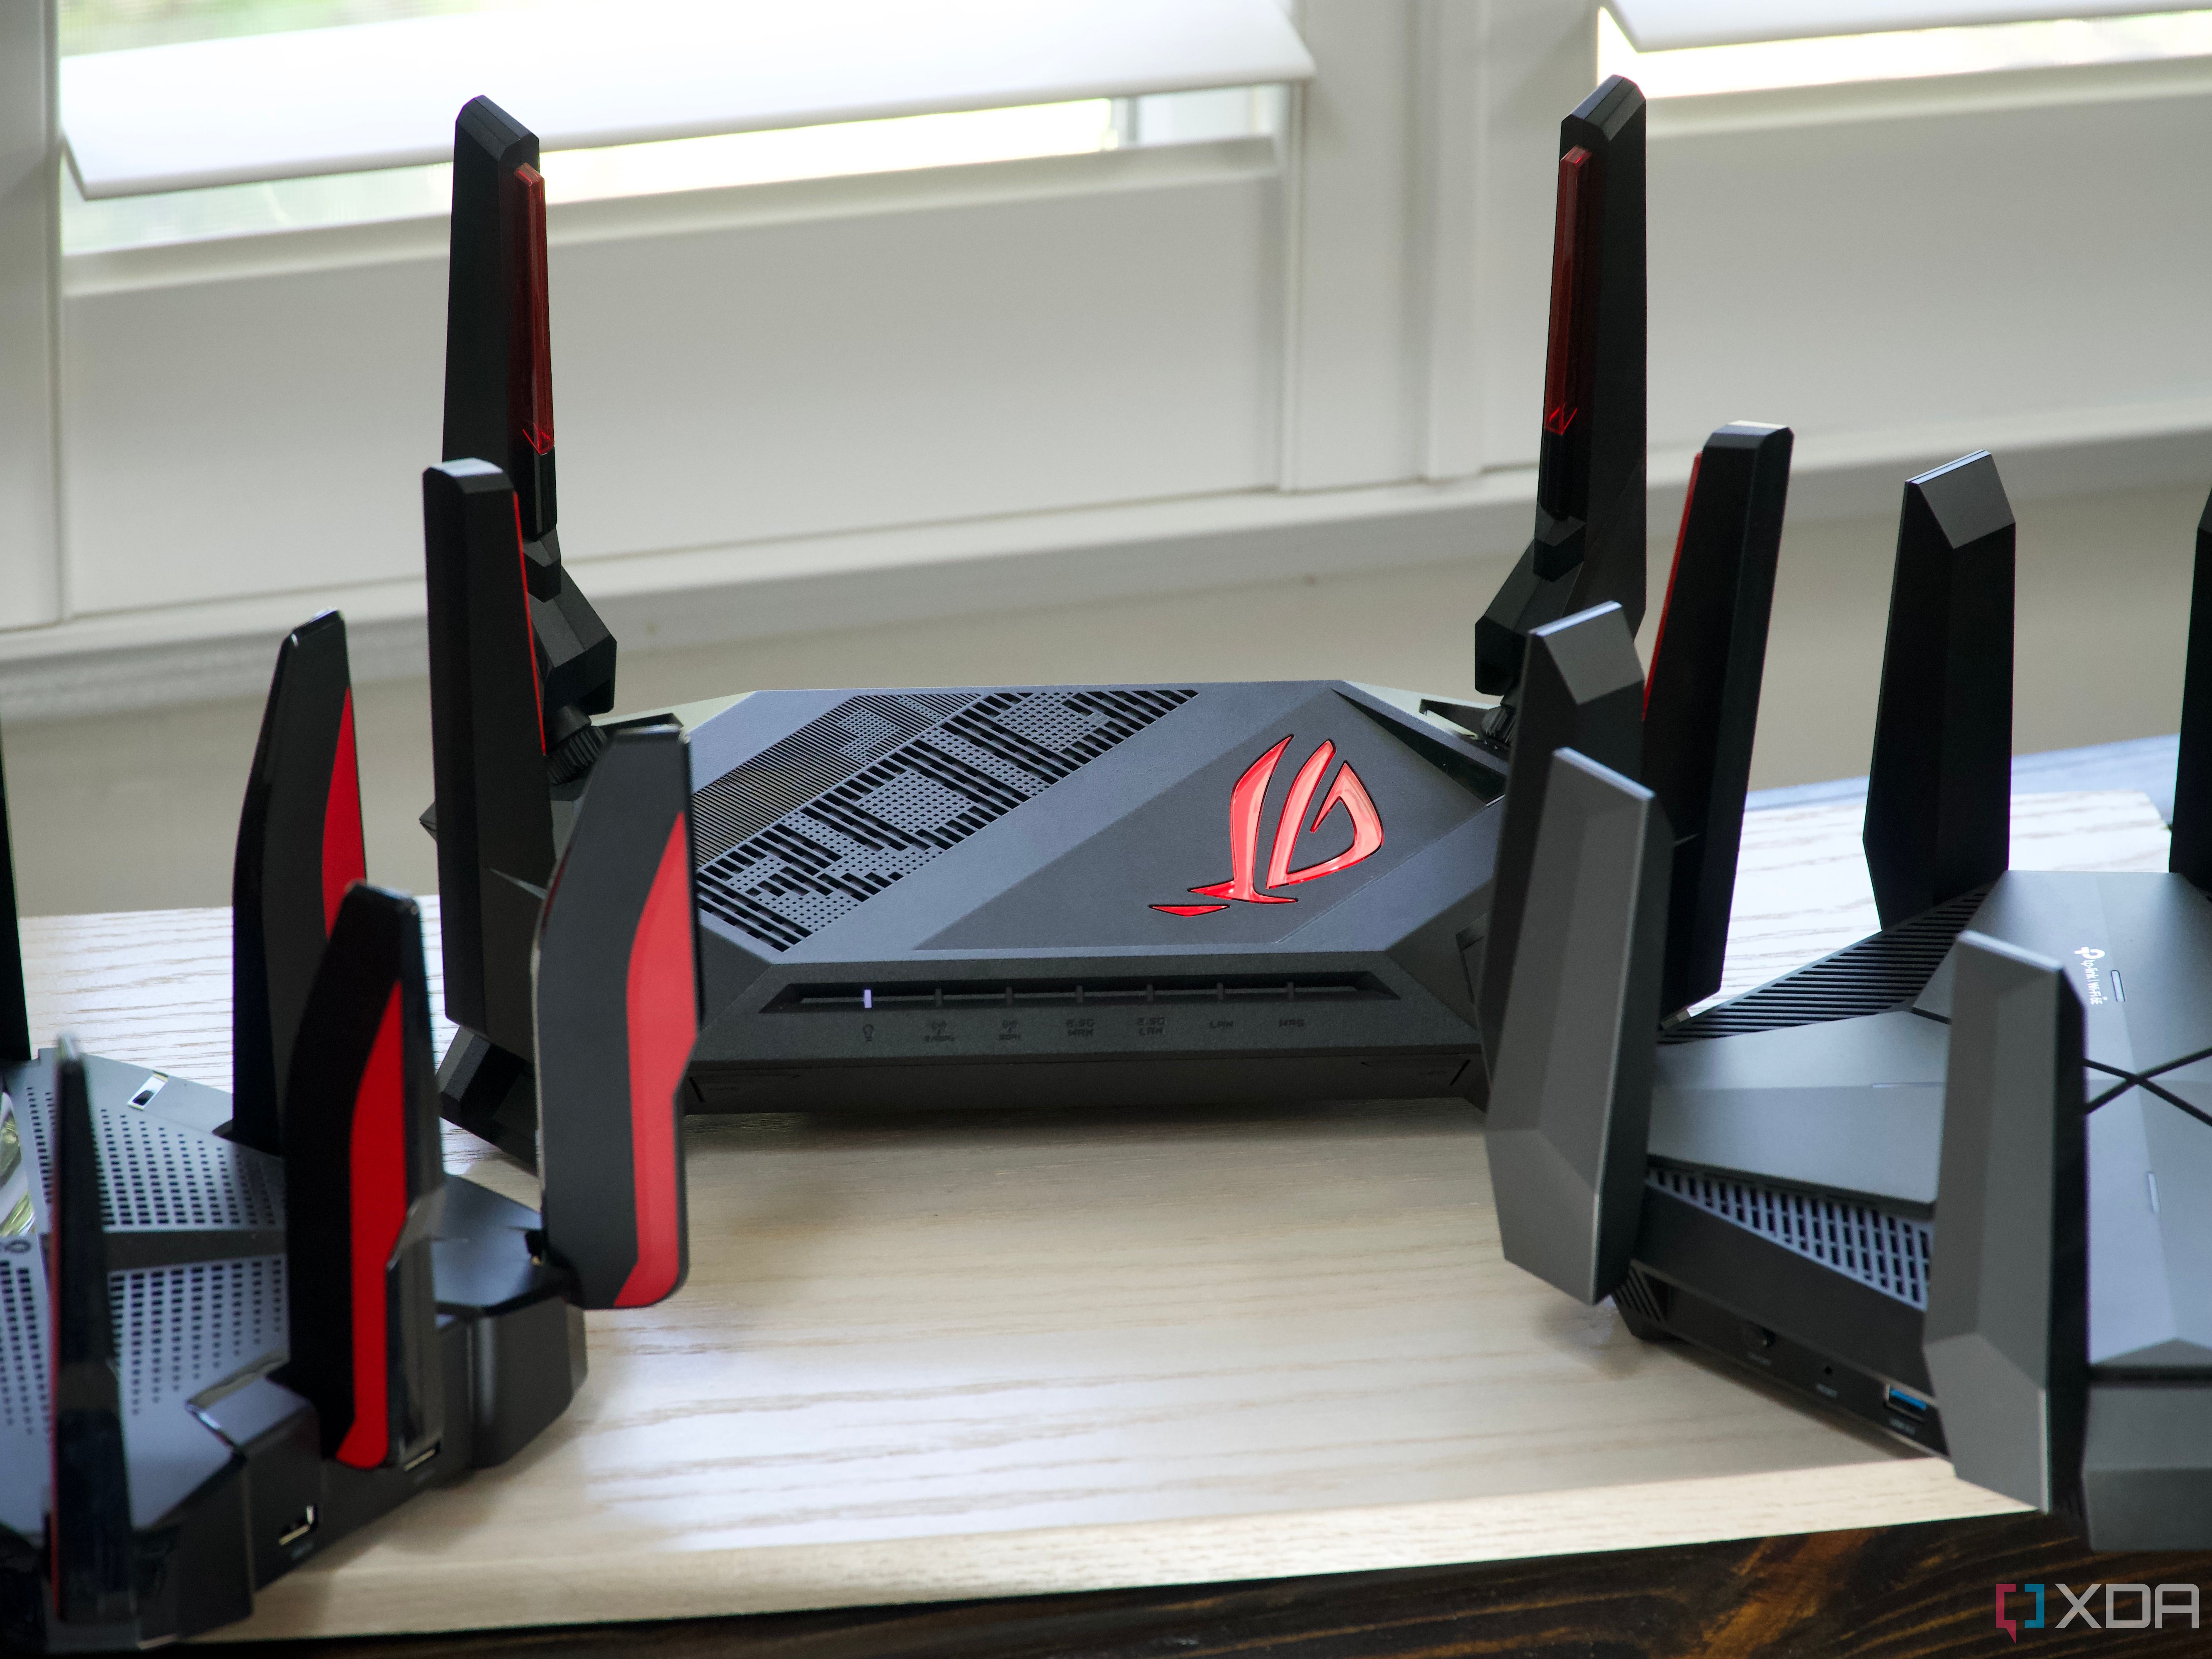 Best Wi-Fi routers for large homes in 2023